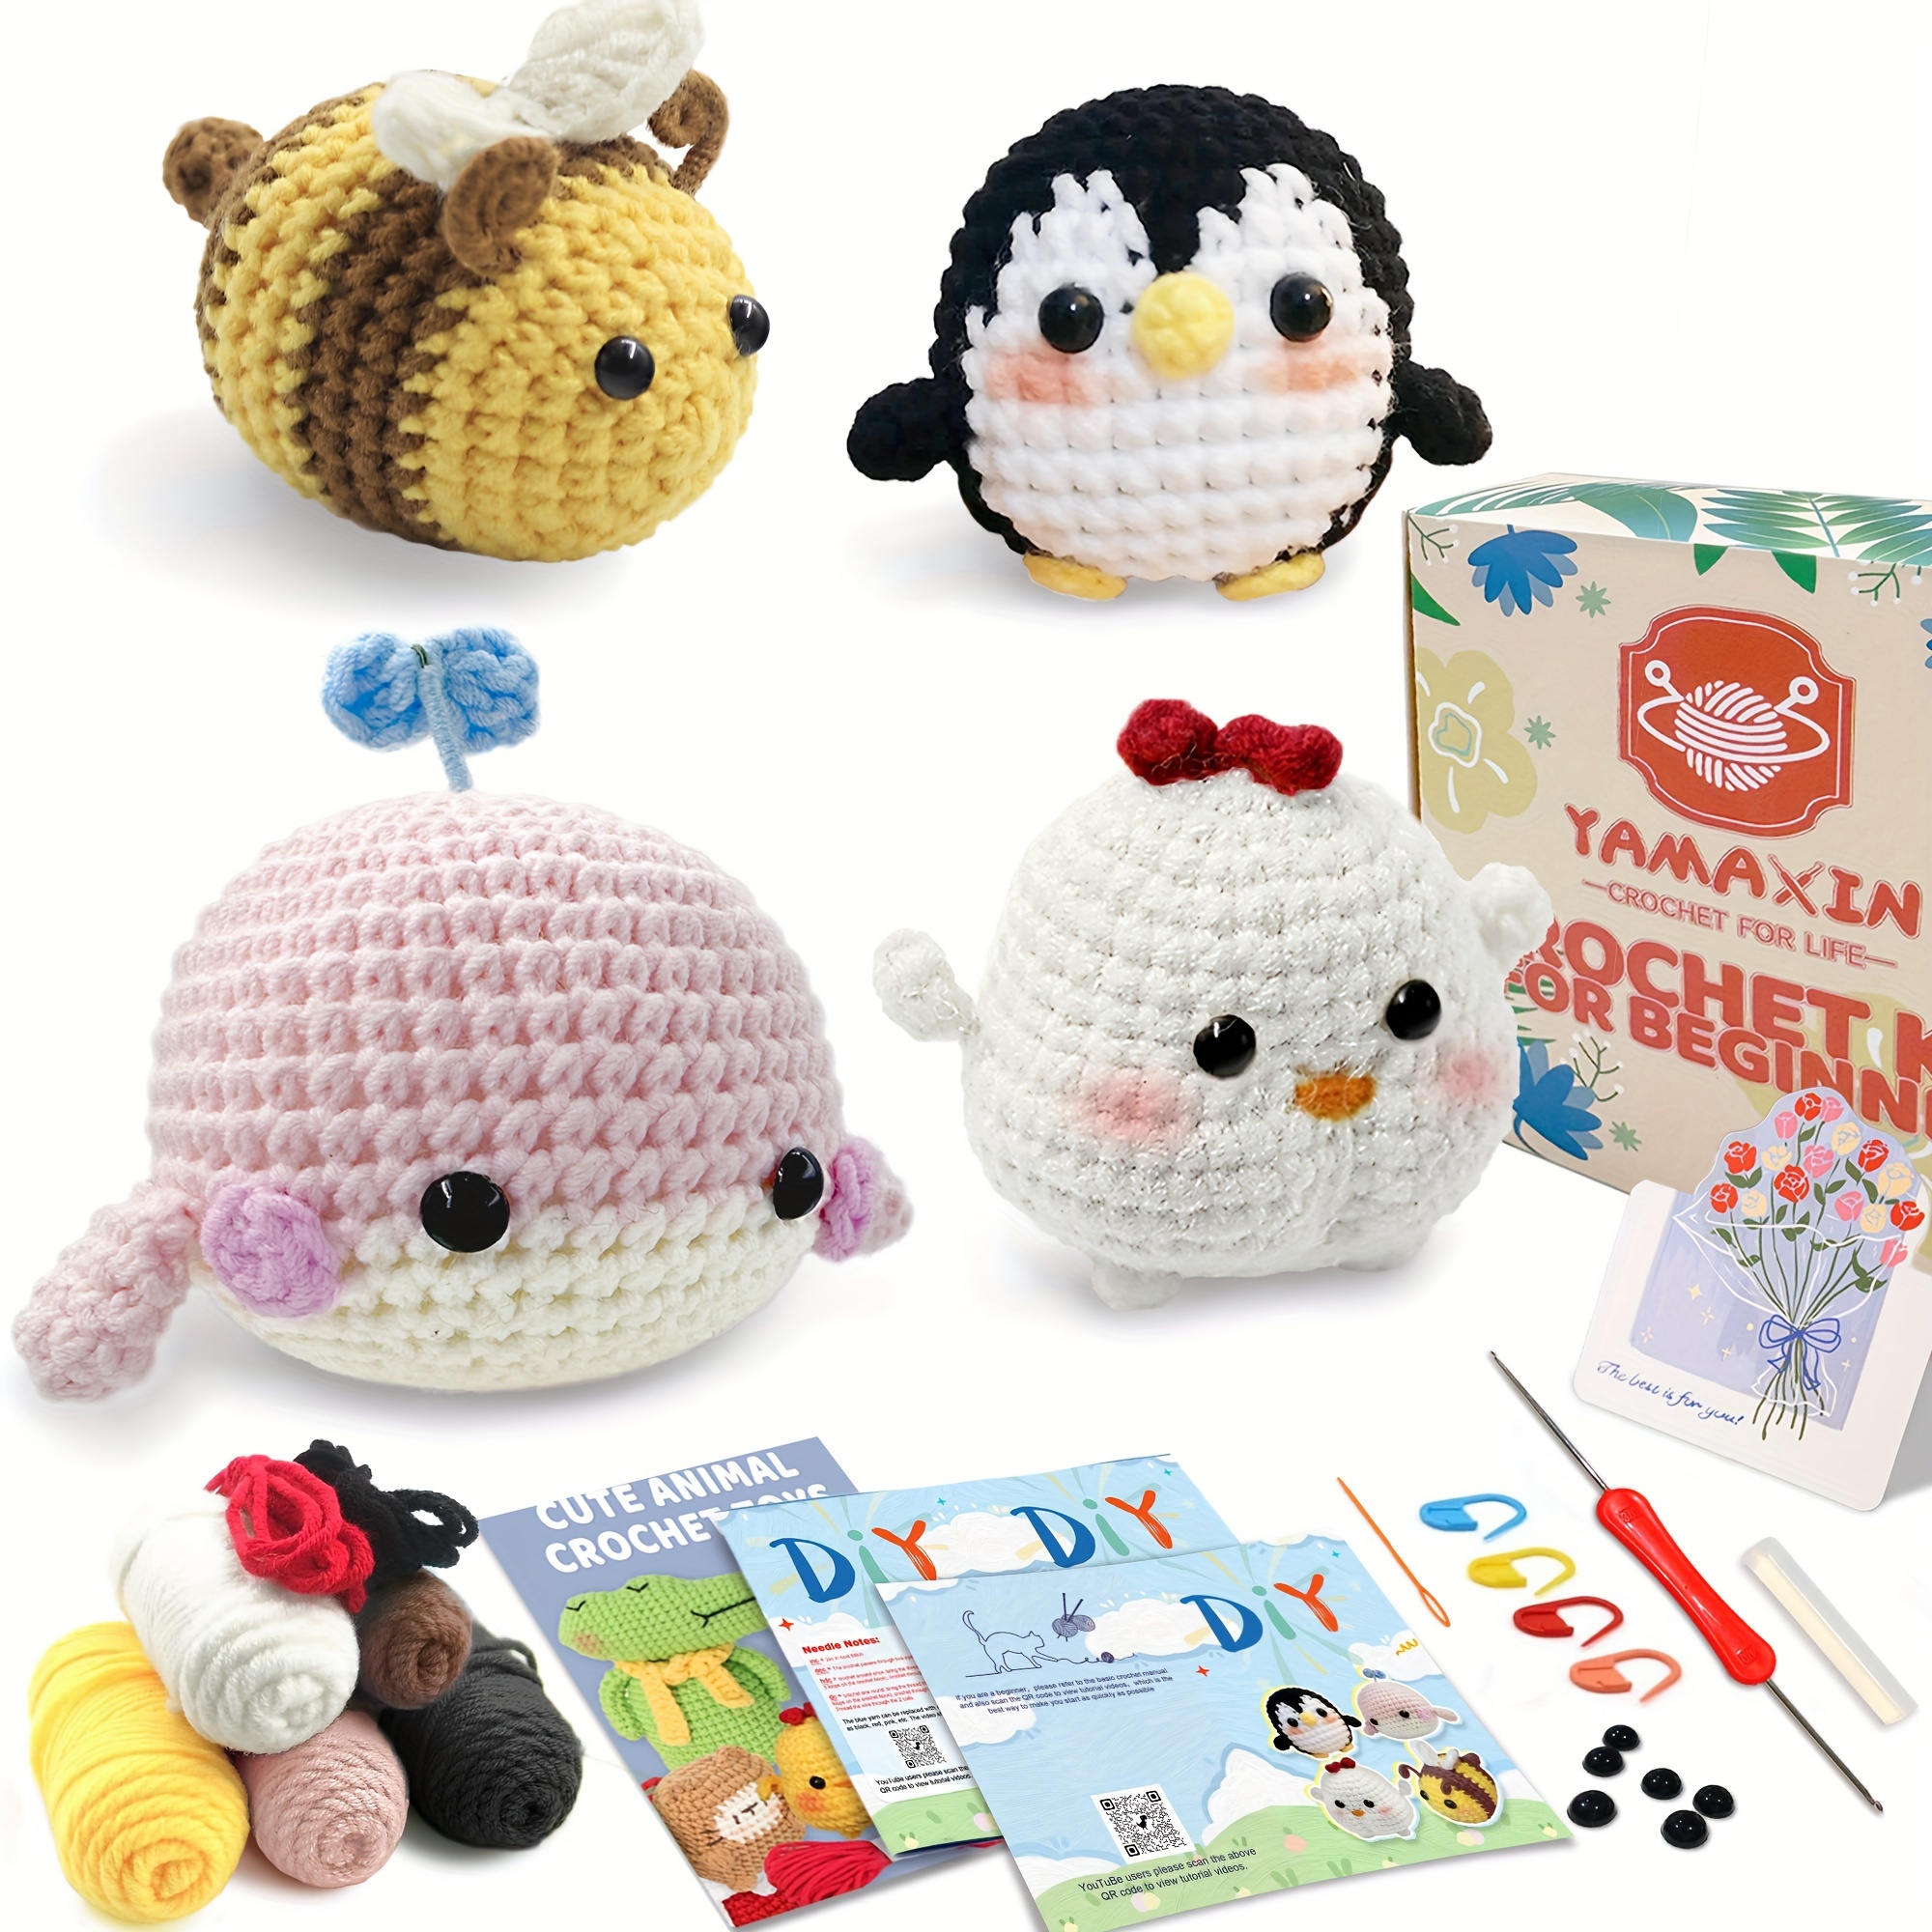 

Crochet Kit For Beginners-4 Pack Whale Chick Penguin Bee Crochet Animal Easy Learn To Starter Amigurumi Knitting Kit And Yarn Craft Kits For Festival Adults Diy With Step-by-step Video Tutorials